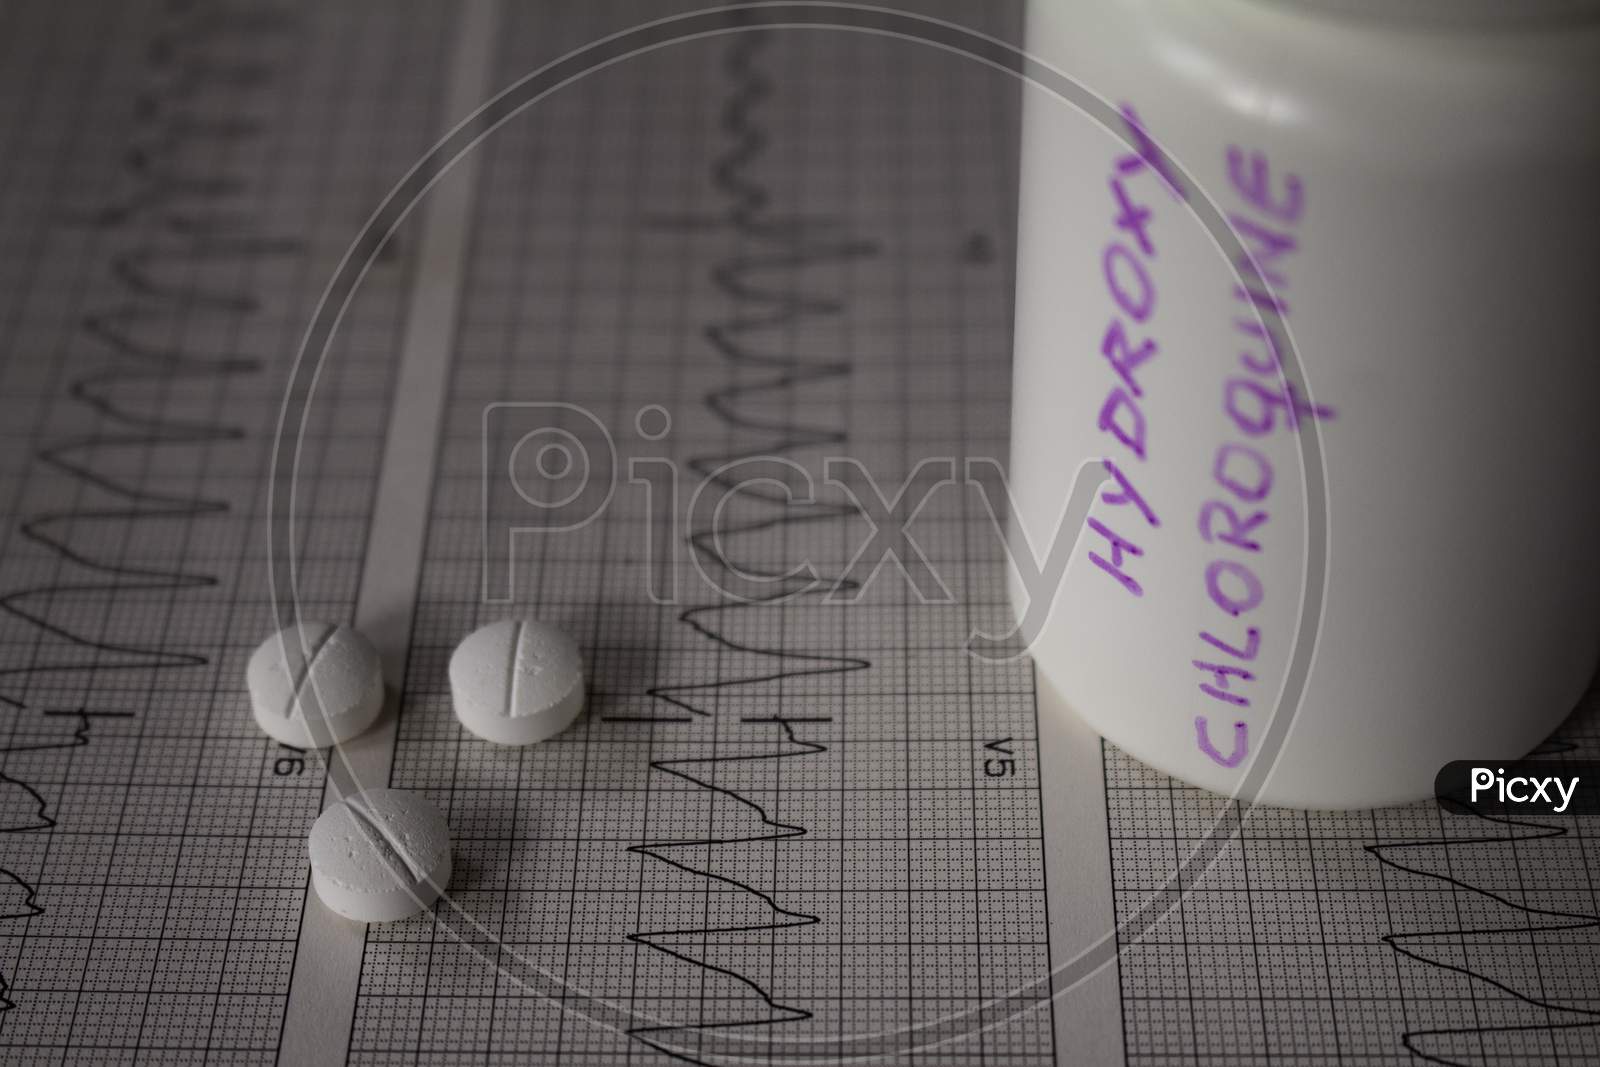 Adverse Effects On The Heart By Hydroxychloroquine Or Chloroquine. Pills On An Electrocardiogram With Cardiac Arrhythmias. White Container With "Hydroxychloroquine" Written On The Side.